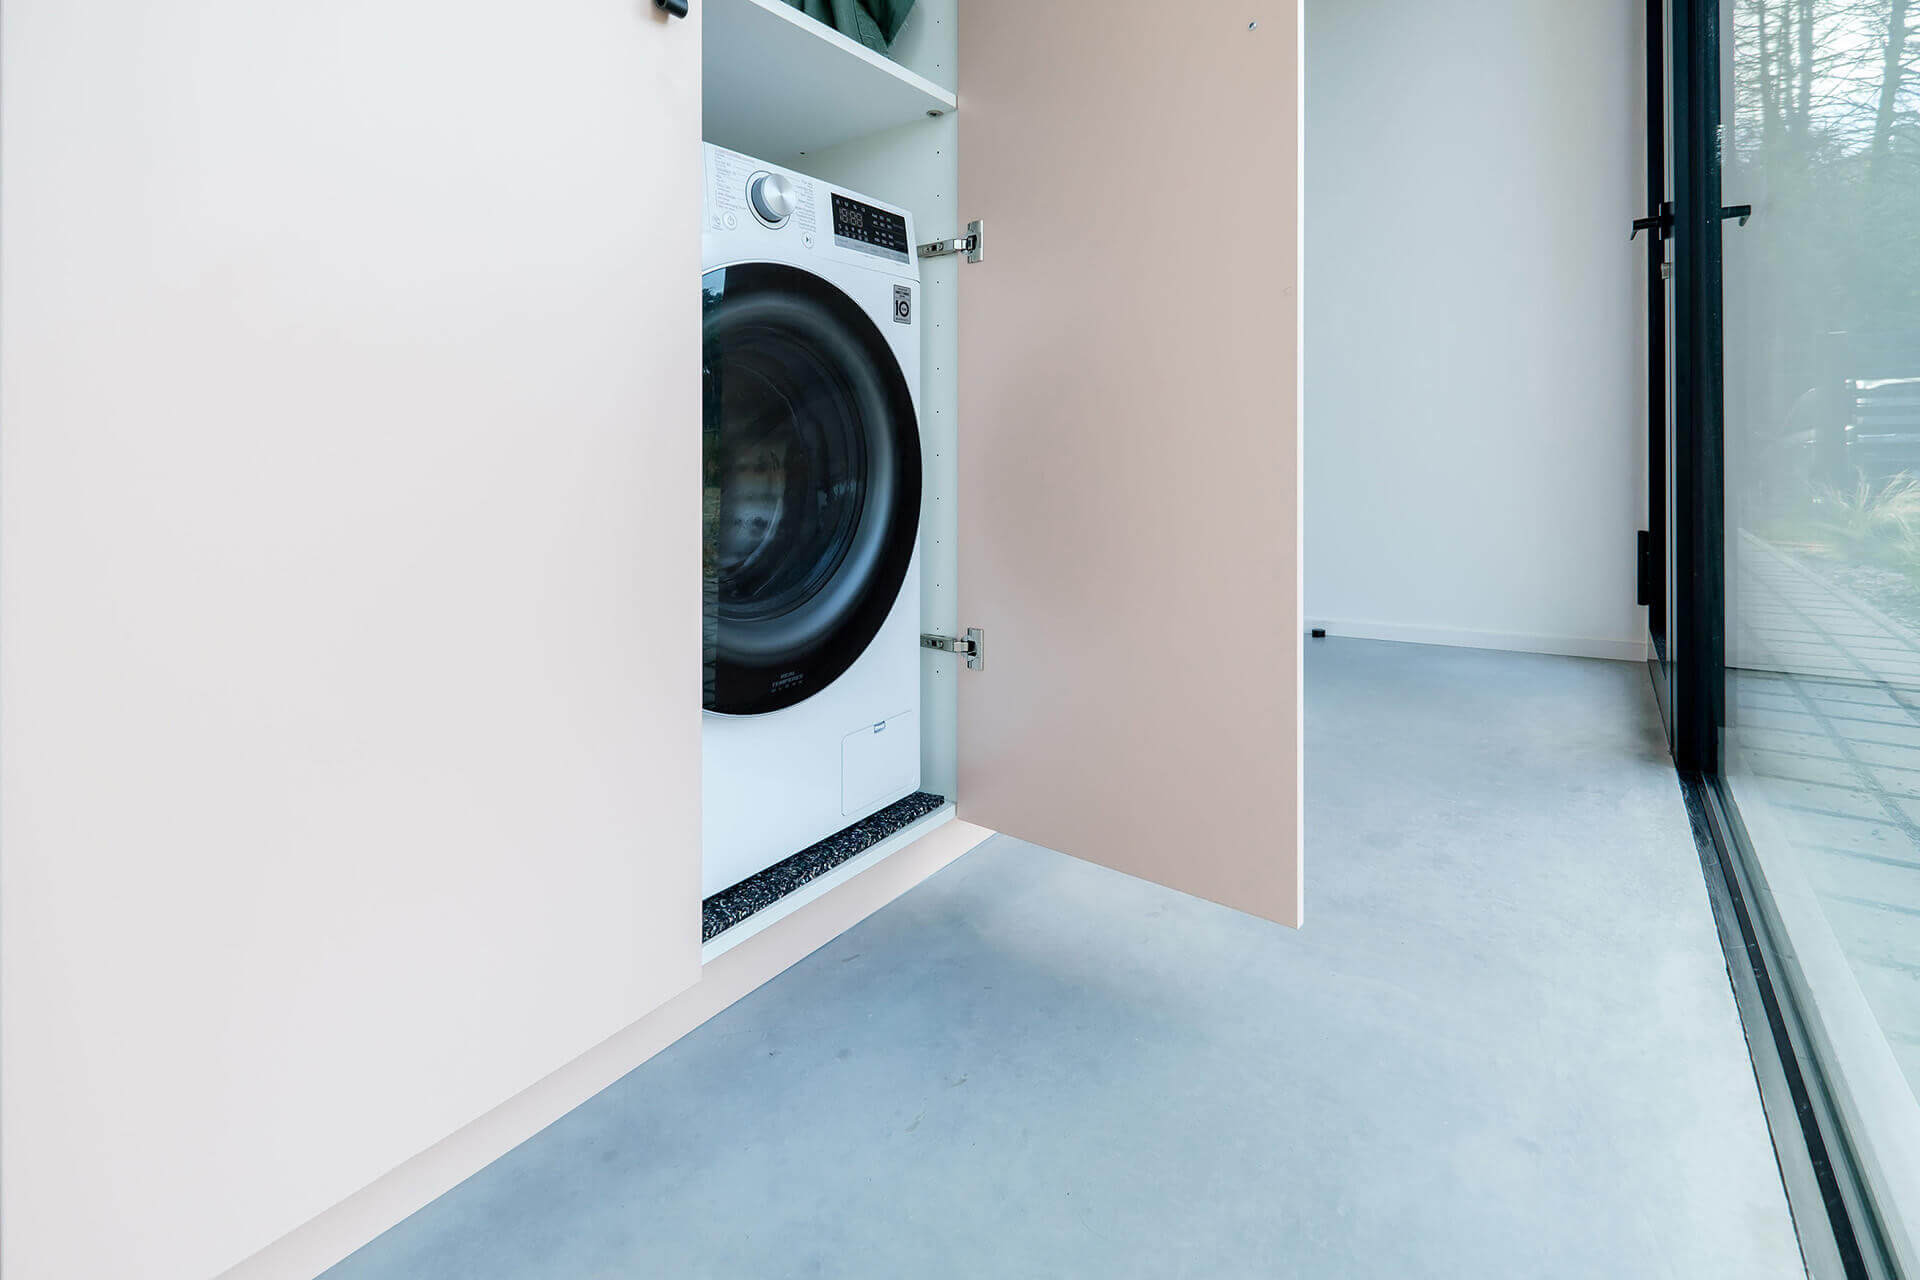 Tailor-made storage unit for washing machines in a modern house